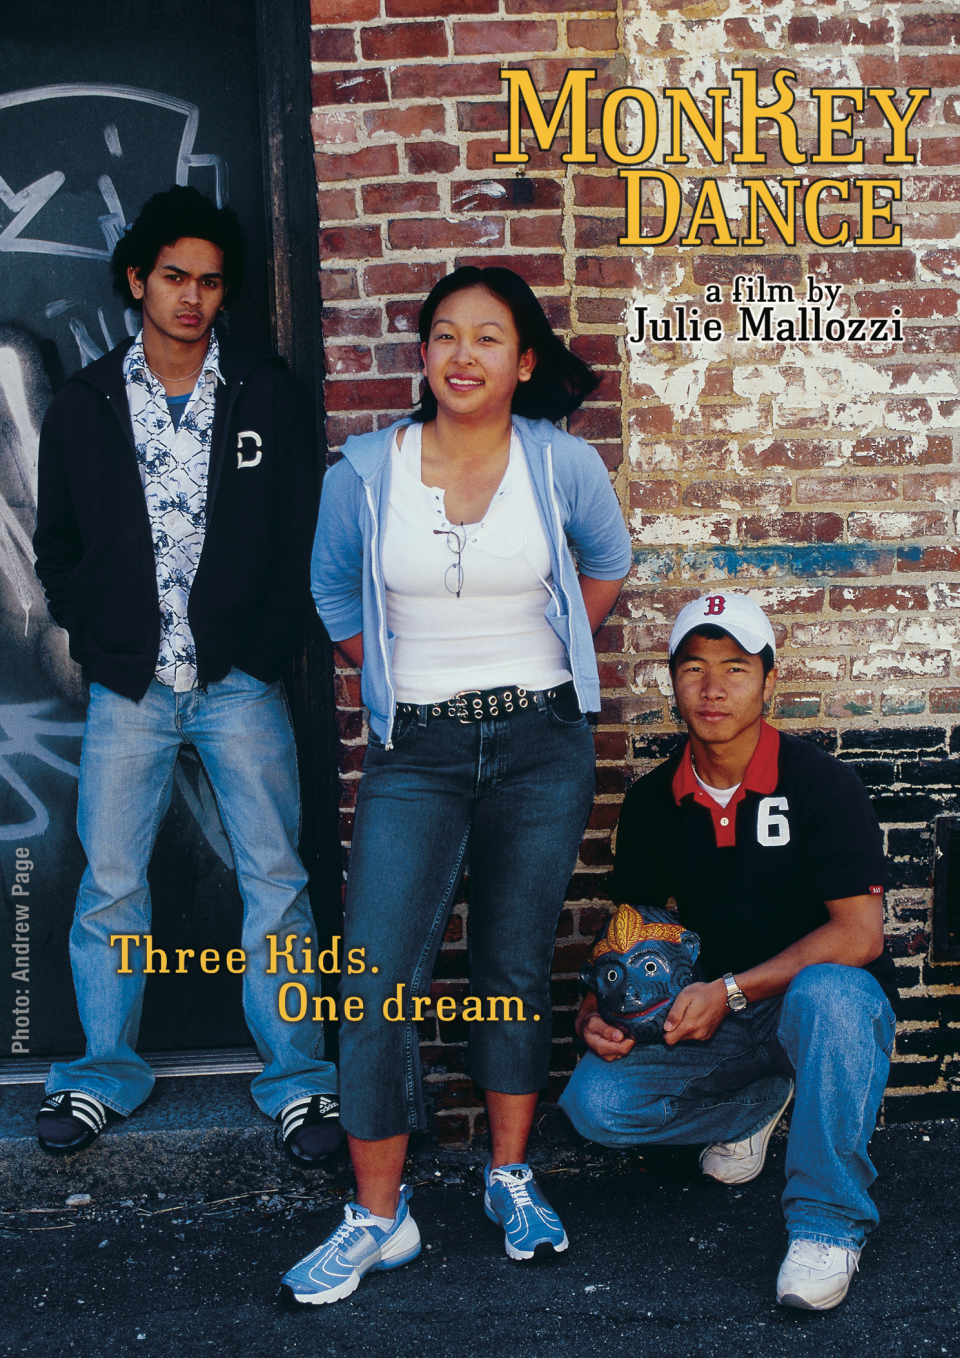 Three individuals, two men and one woman, stand in front of a brick wall and graffiti. The title text floats above the brick wall with the subtitle: "Three Kids. One dream."